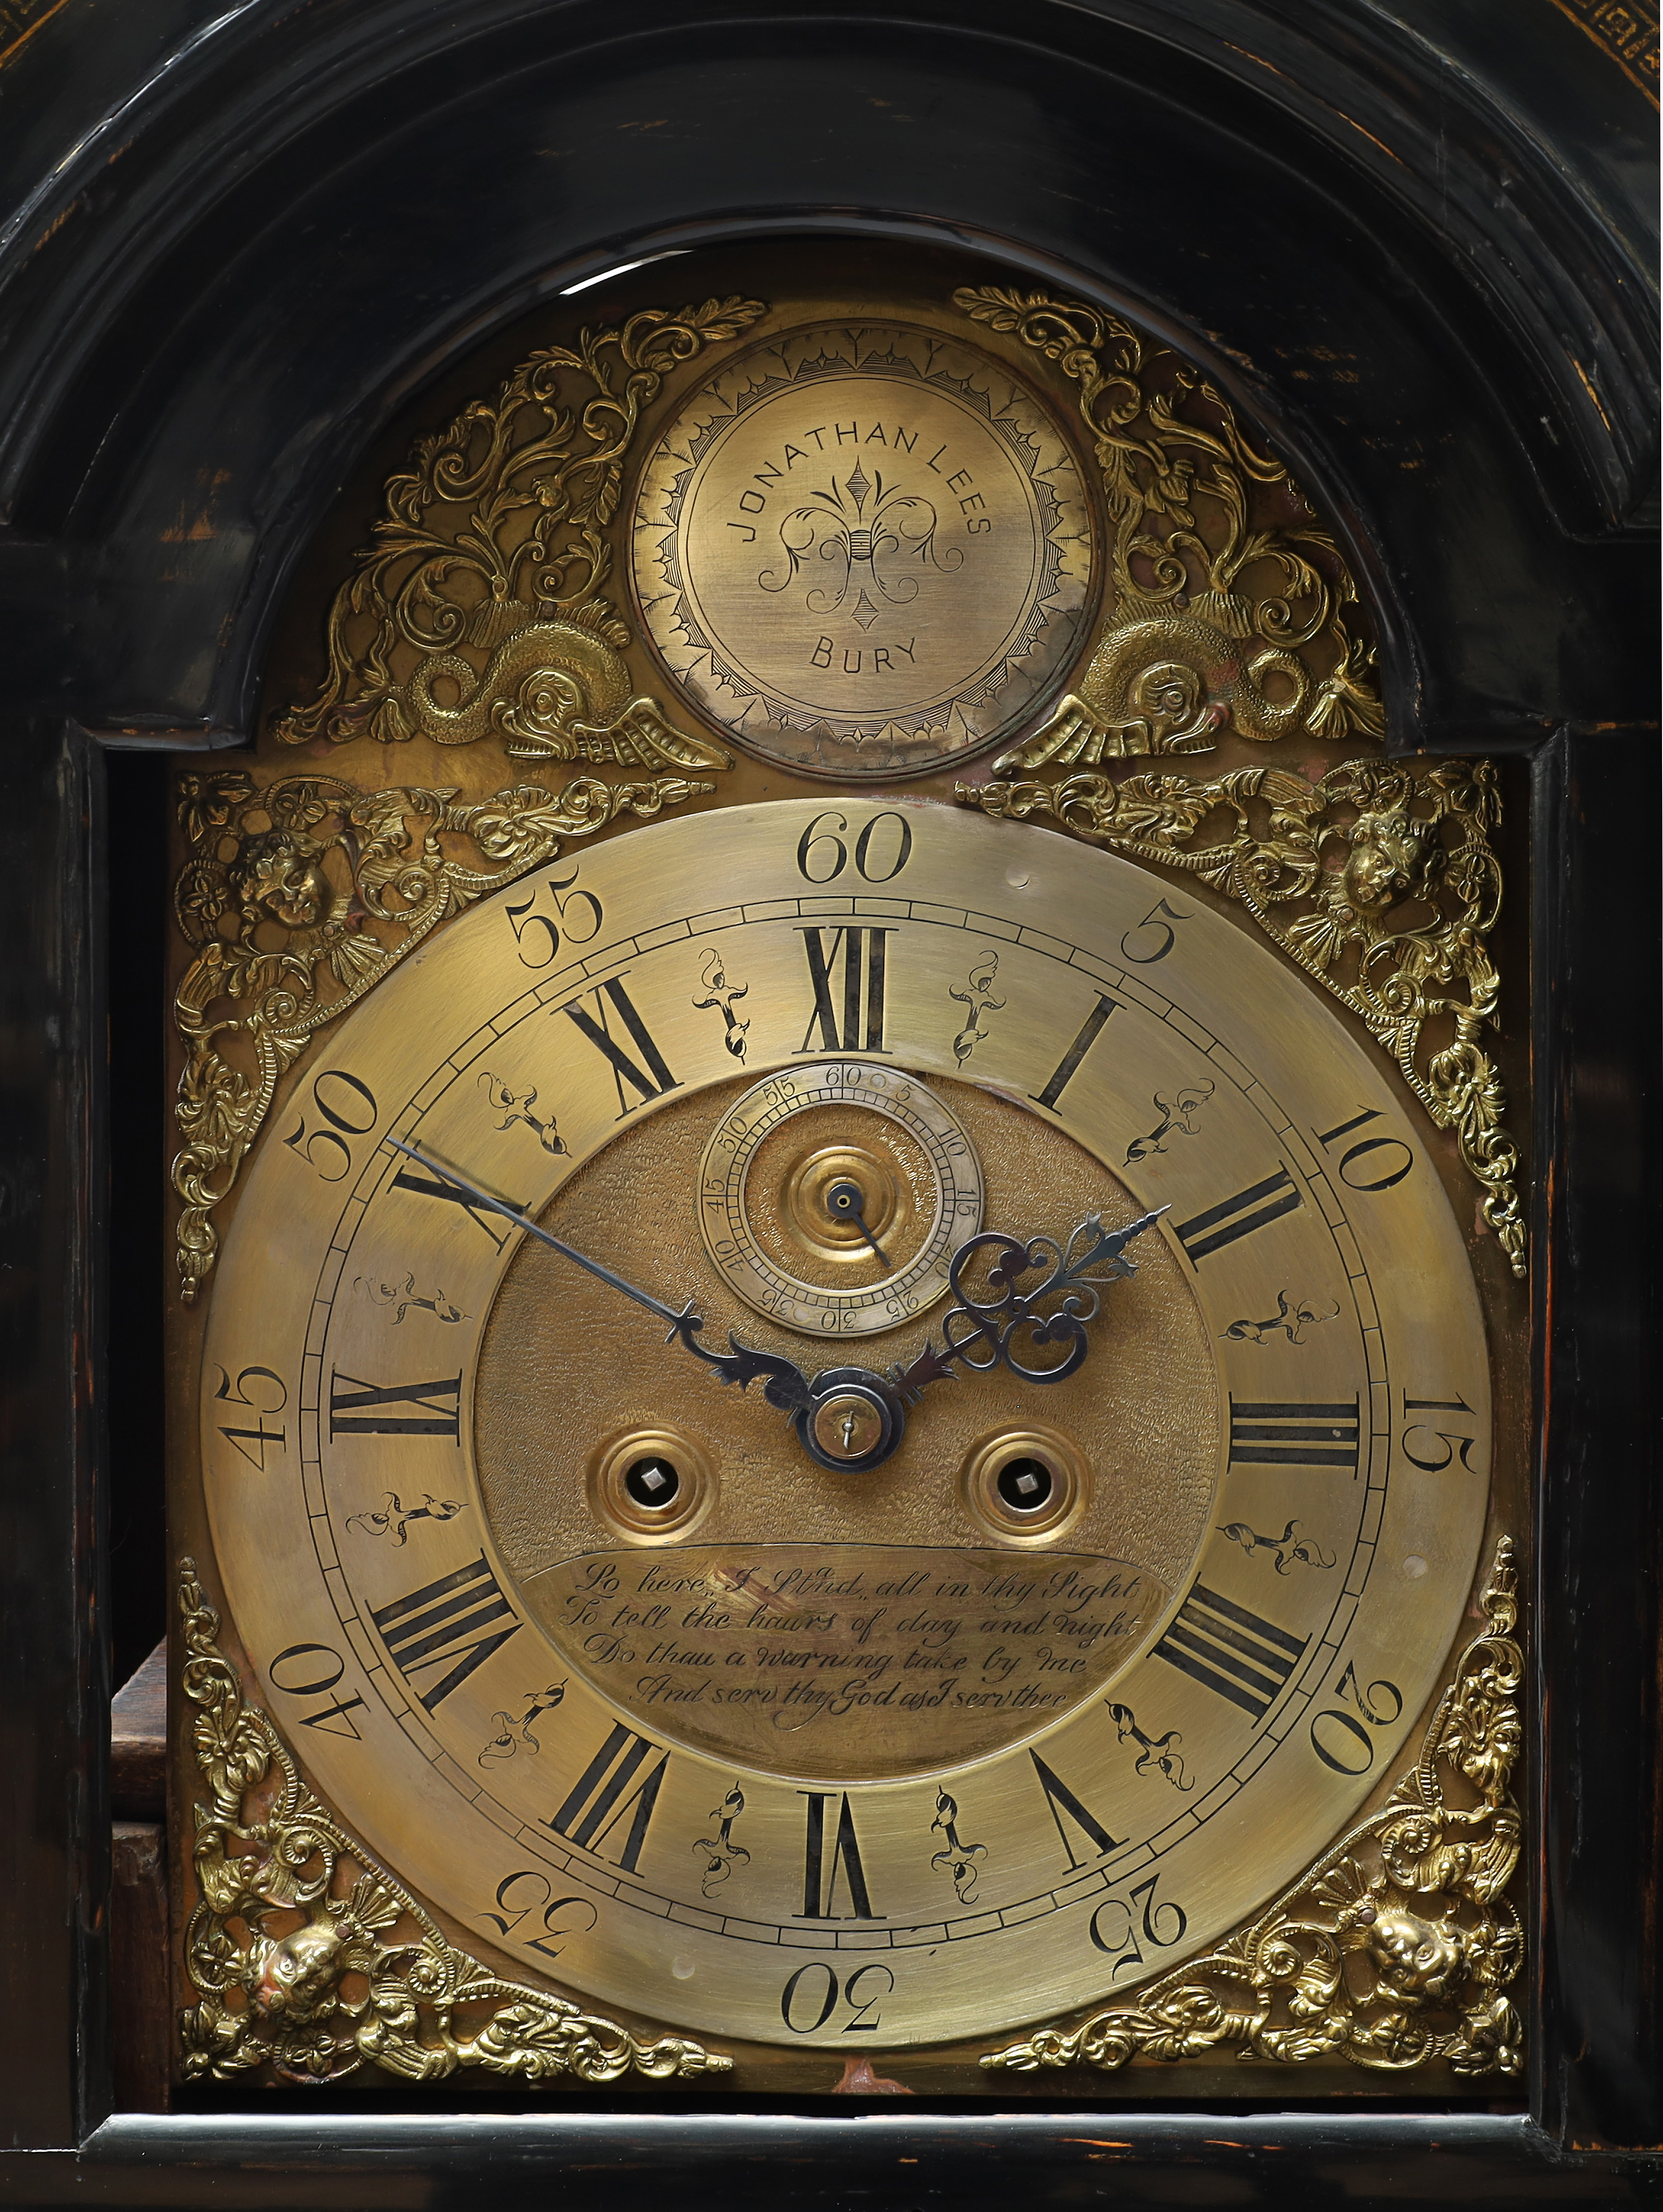 An English black japanned longcase clock, mid-18th century, the case with chinoiserie decoration ... - Image 2 of 4